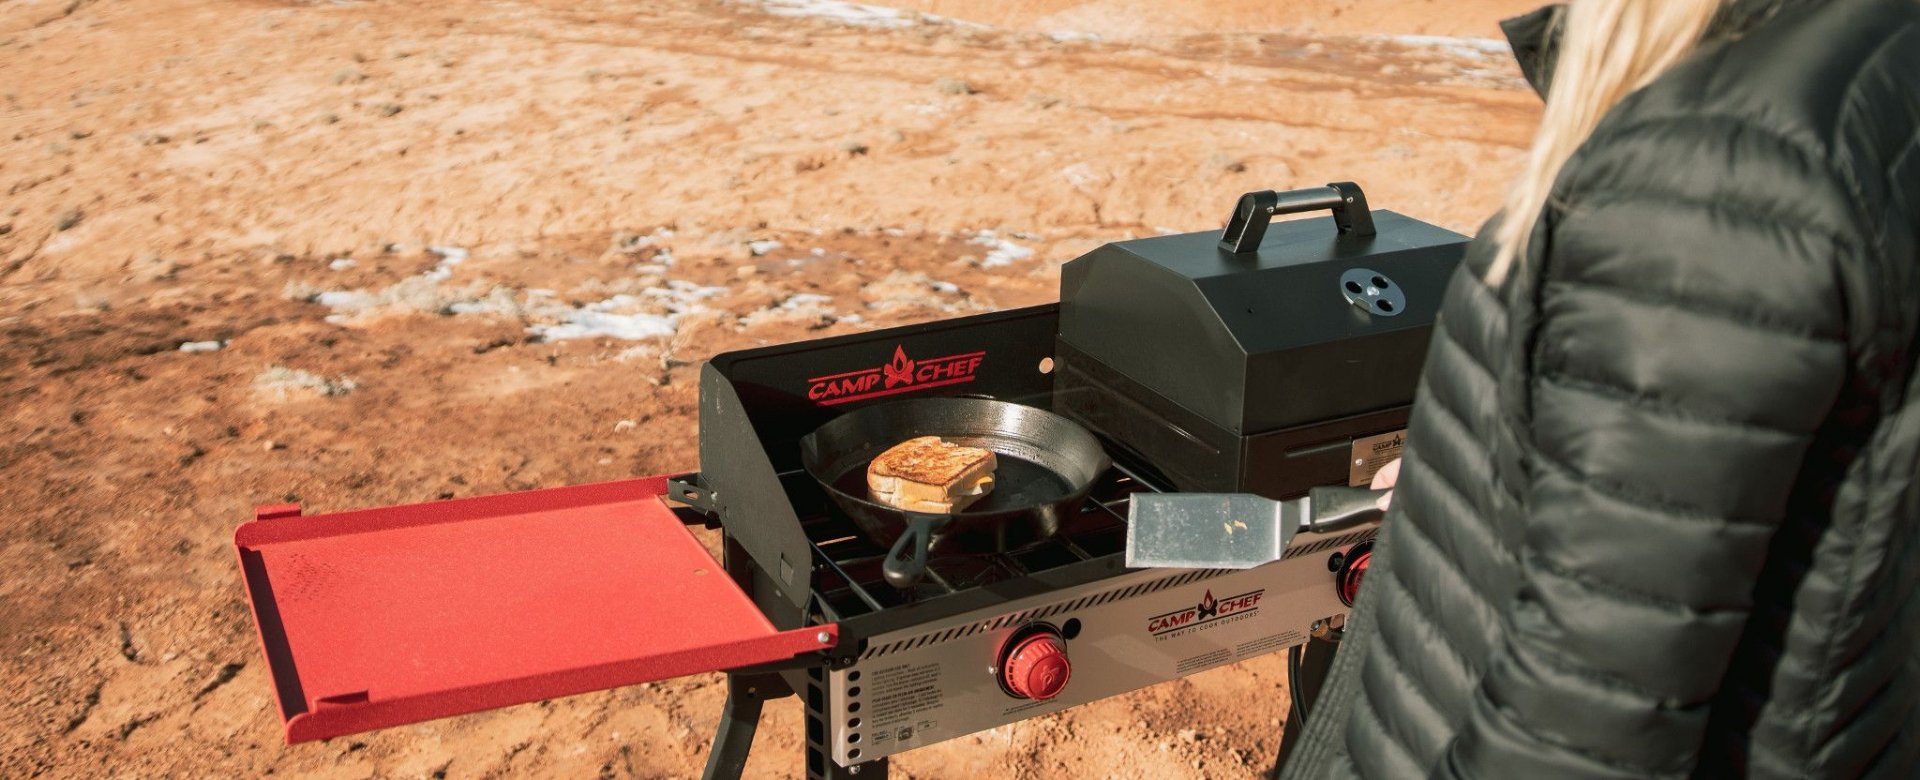 Choose the Best Camp Stove For You